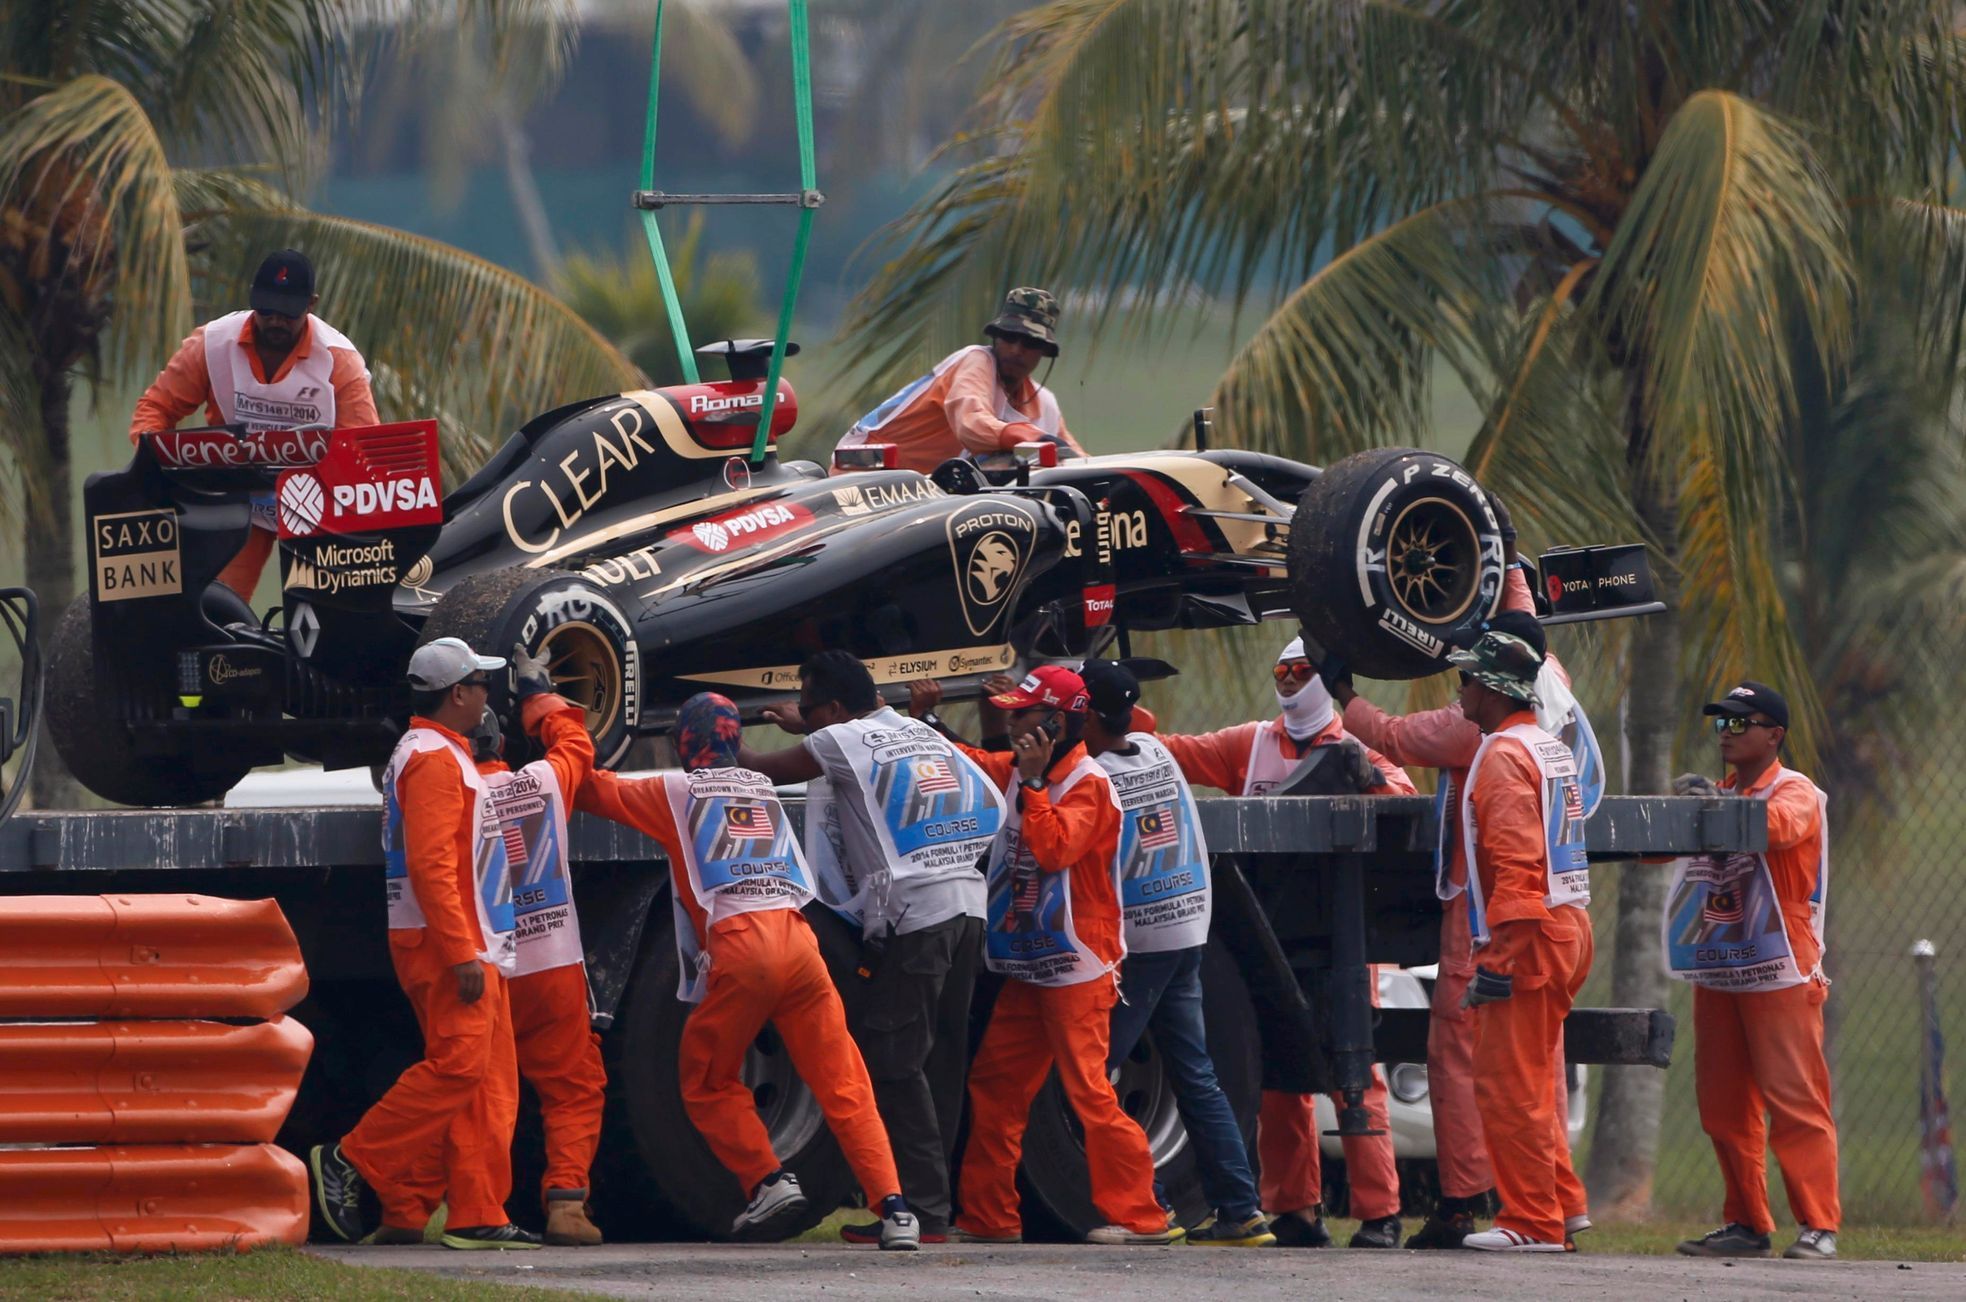 The car of Lotus Formula One driver Grosjean is removed from the tracks during the second practice session of the Malaysian F1 Grand Prix at Sepang International Circuit outside Kuala Lumpur